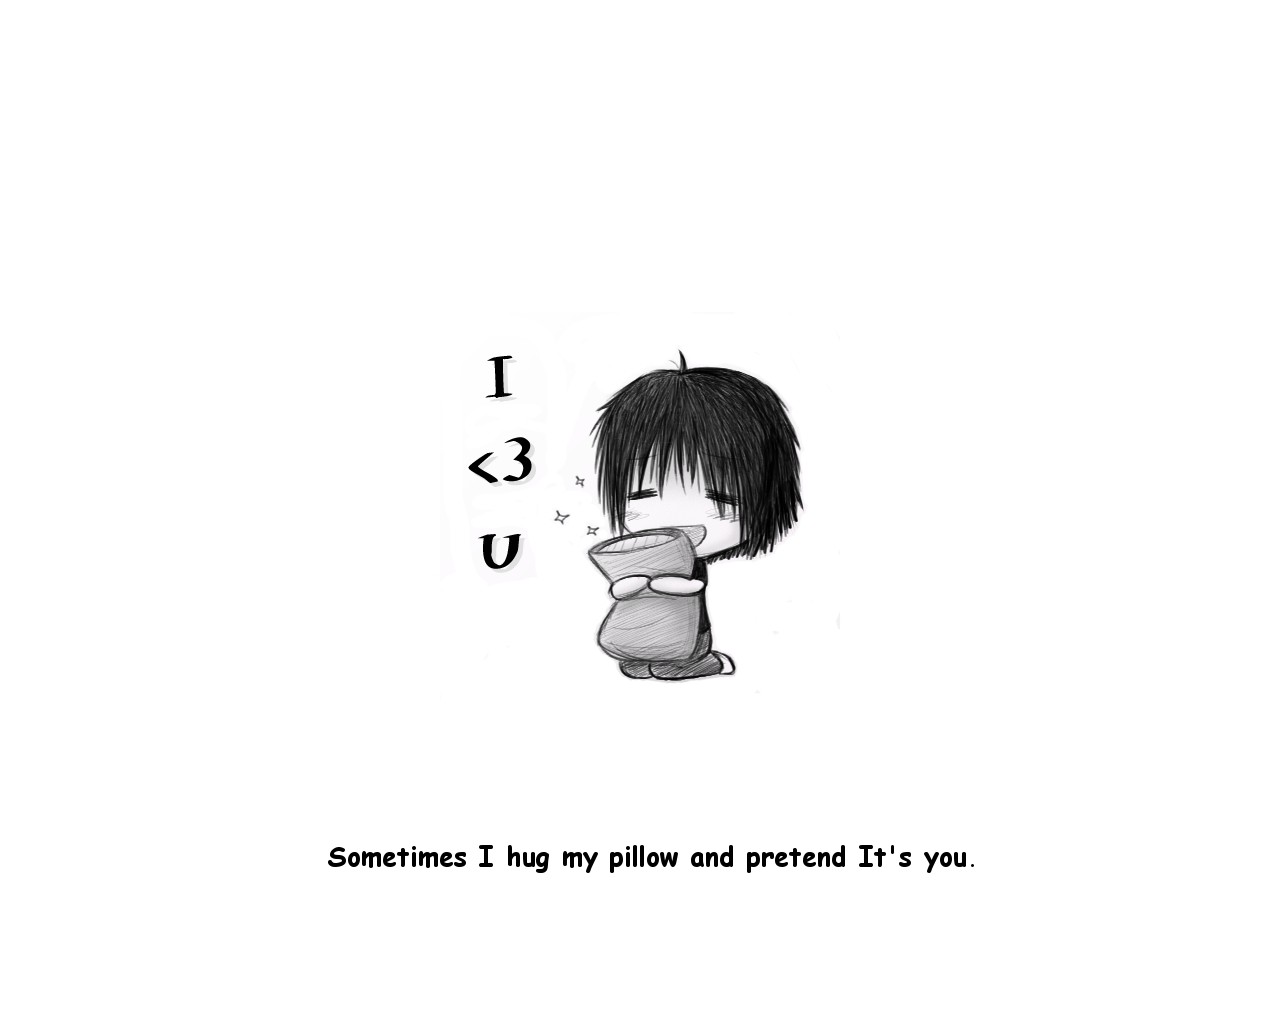 General 1280x1024 love drawing simple background white background pillow monochrome artwork